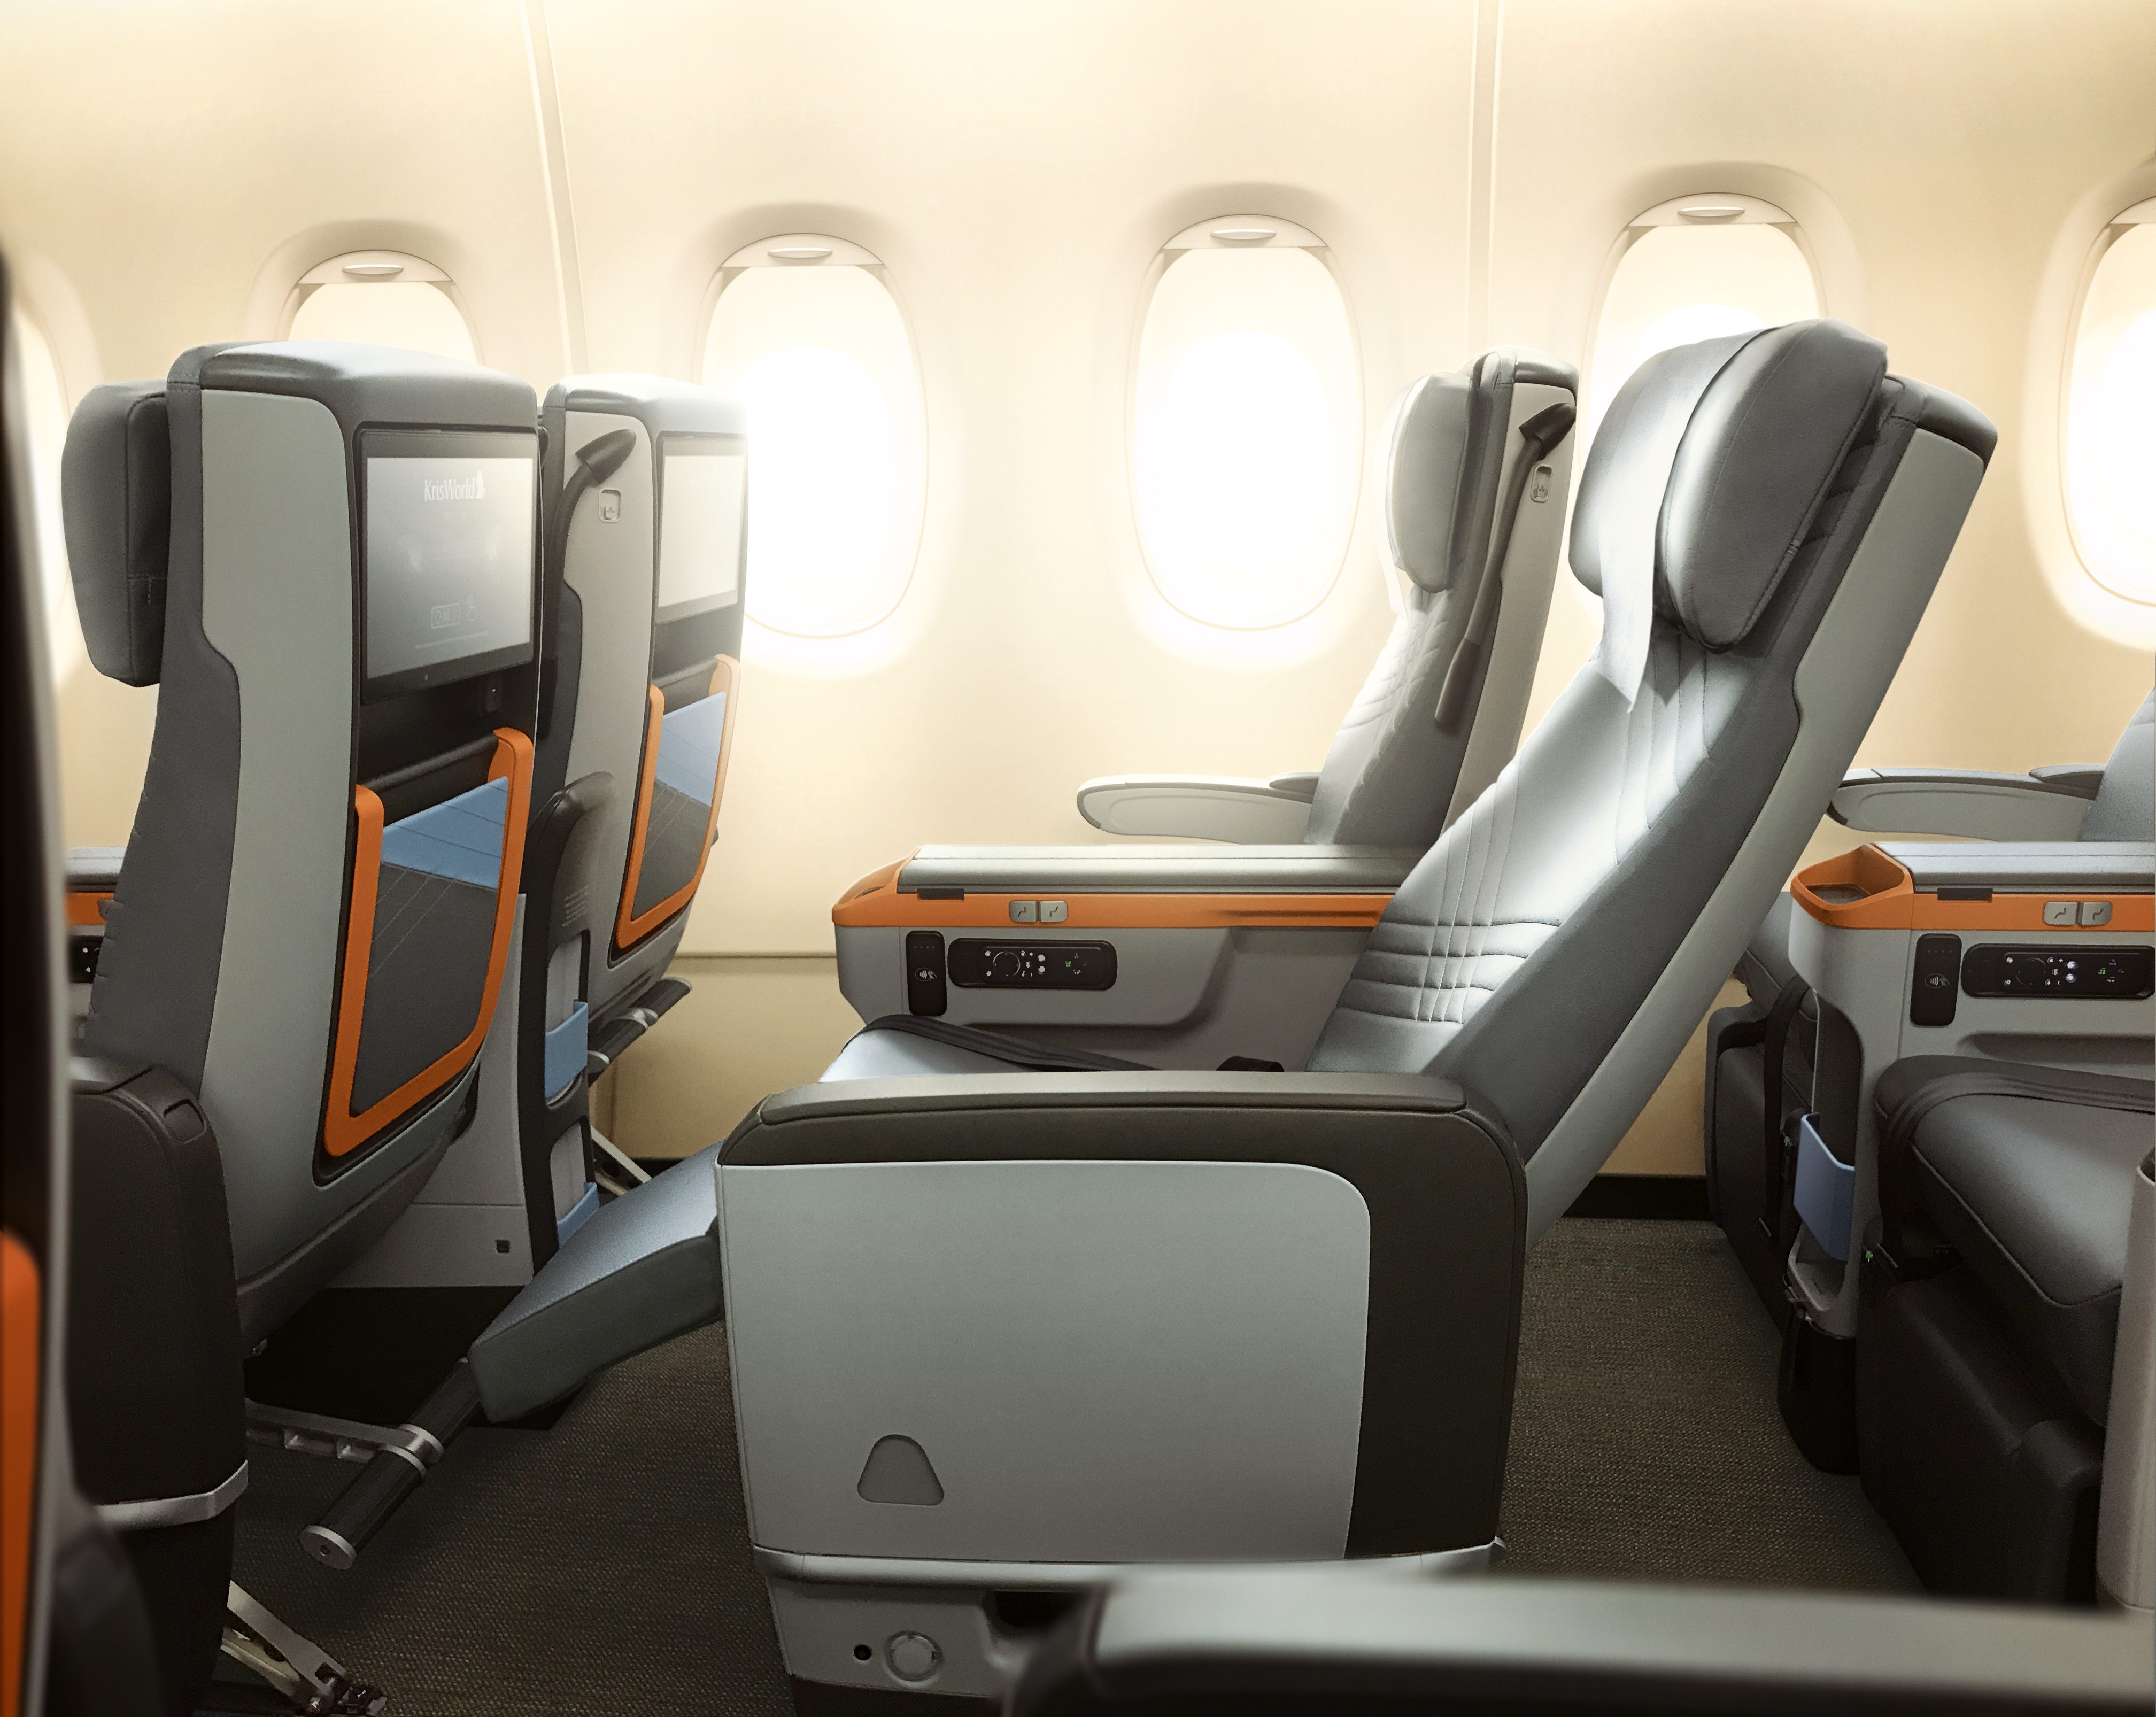 PREMIUM ECONOMY. The A380 planes flying to selected destinations will have spacious premium economy seats  